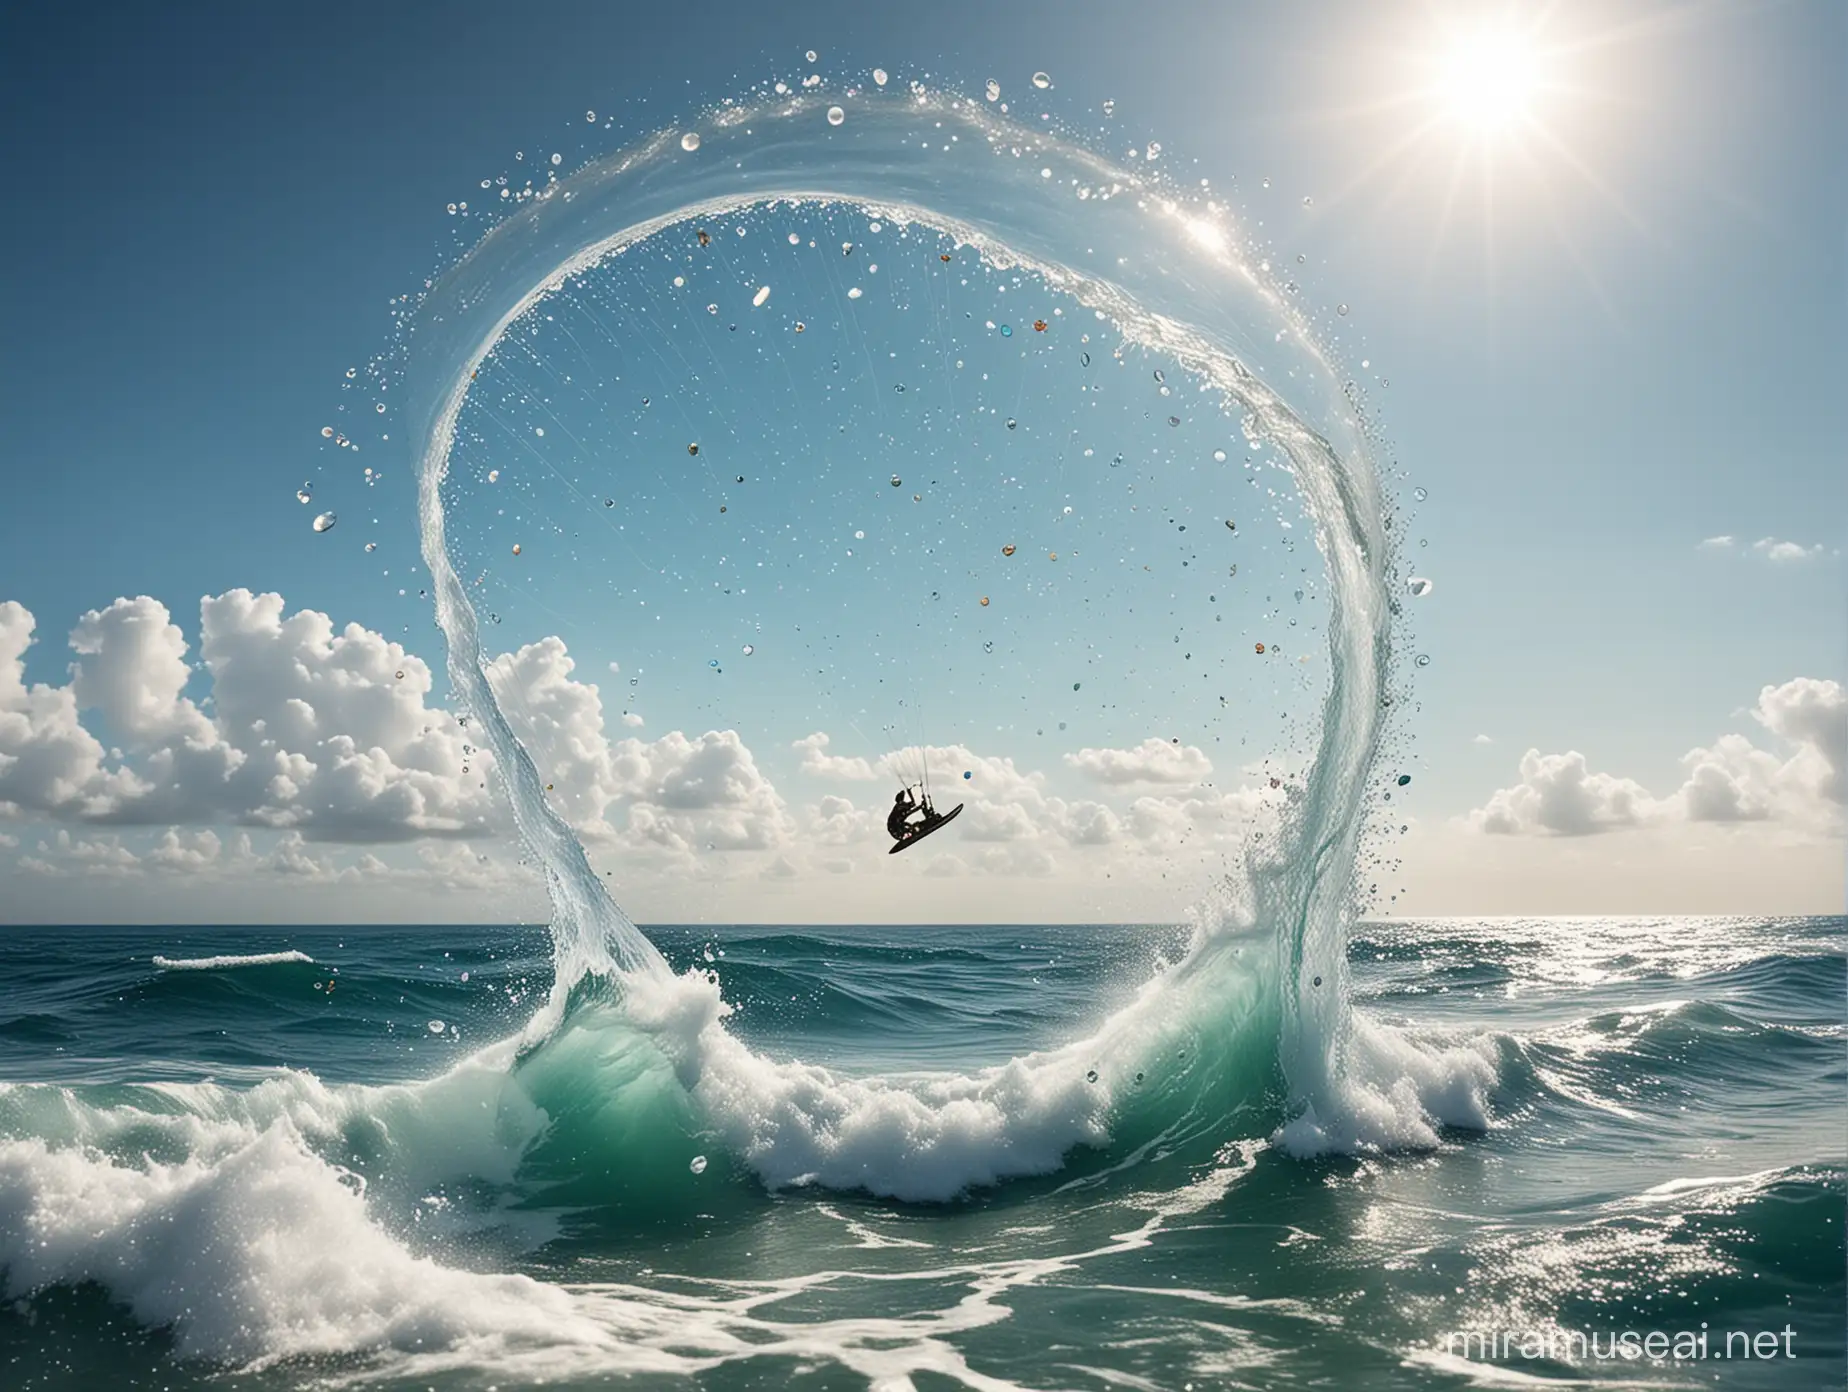 make a background where the sea meets the sky with lots of water splash, and there is a floating glass can with a detergent beads inside it, floating in the center of it with splash around them. add sea creatures on the sea and people surfing and paragliding on top of the ocean and the sky
